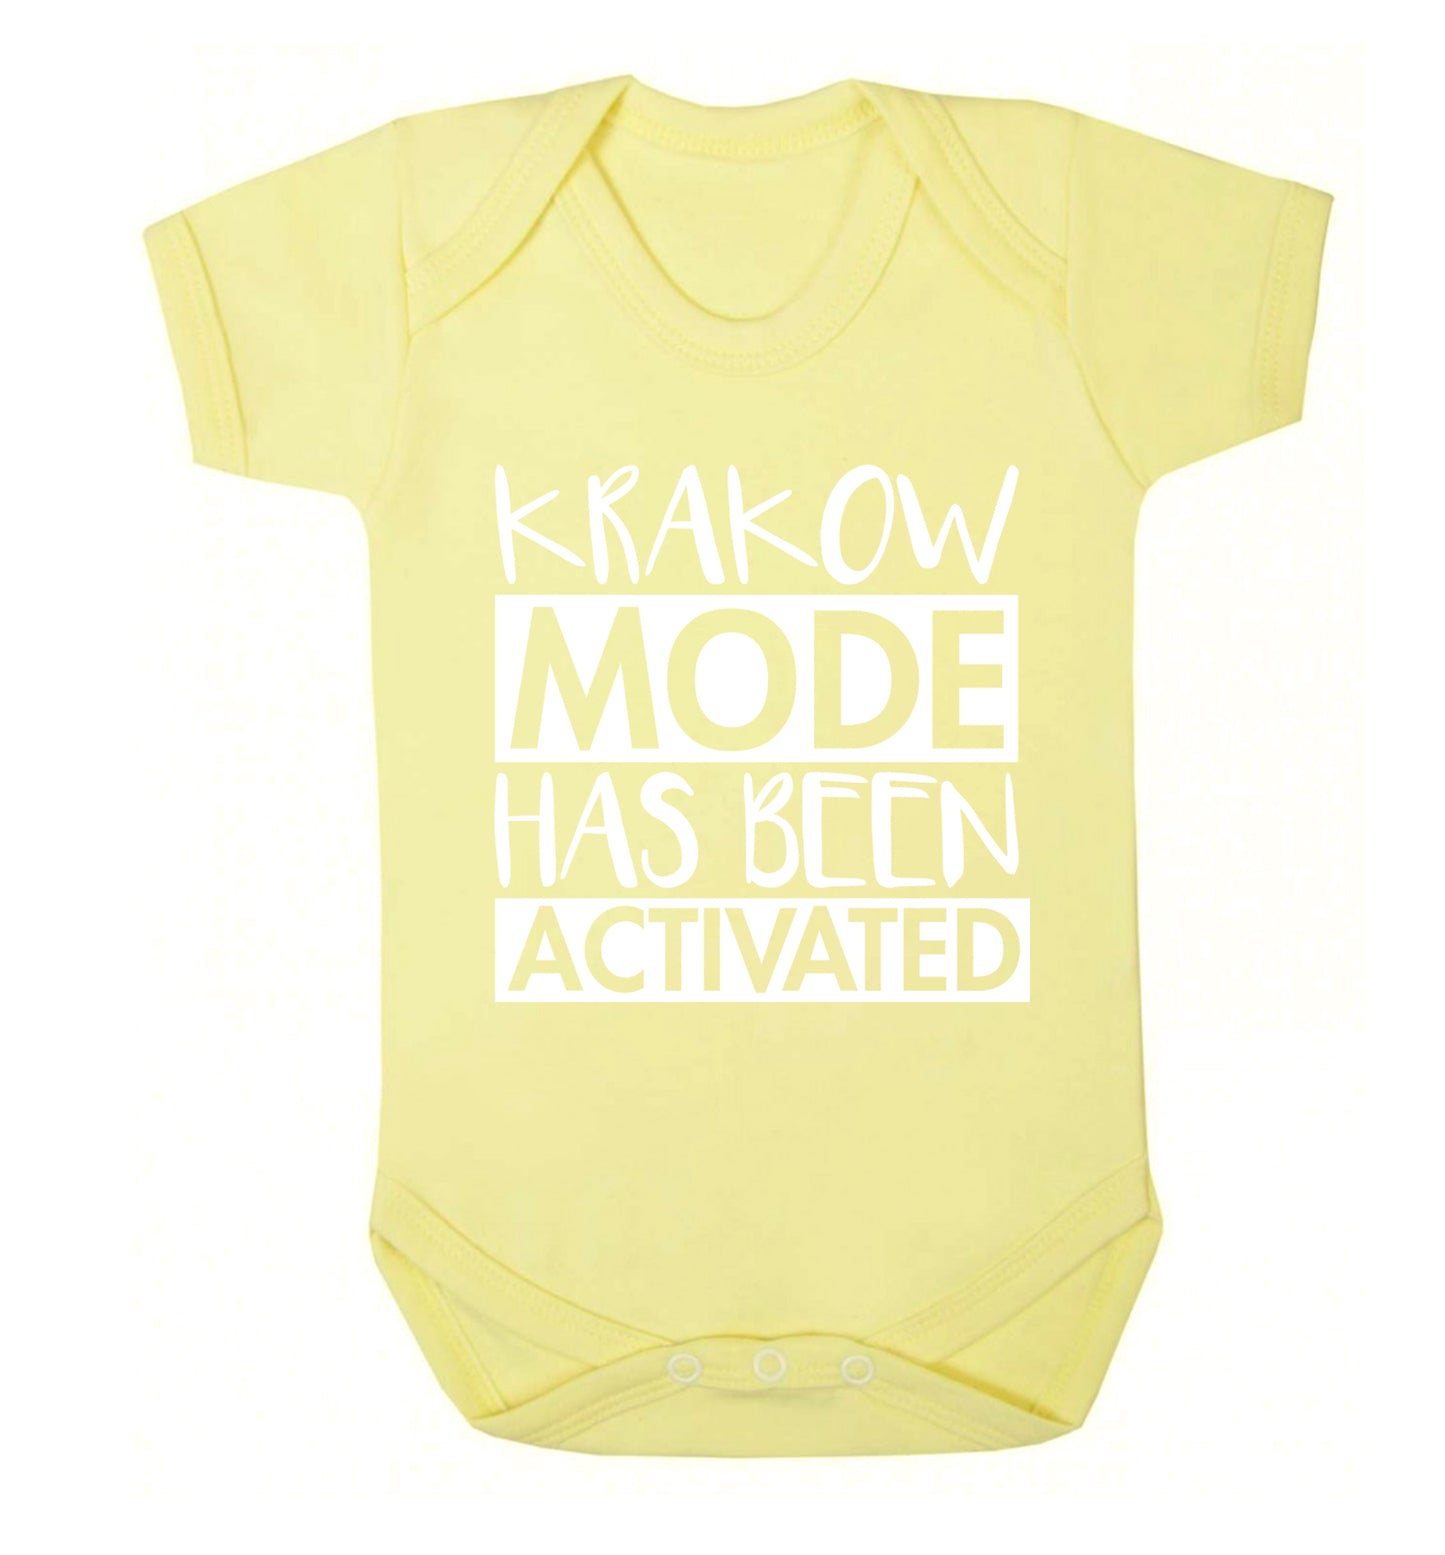 Krakow mode has been activated Baby Vest pale yellow 18-24 months